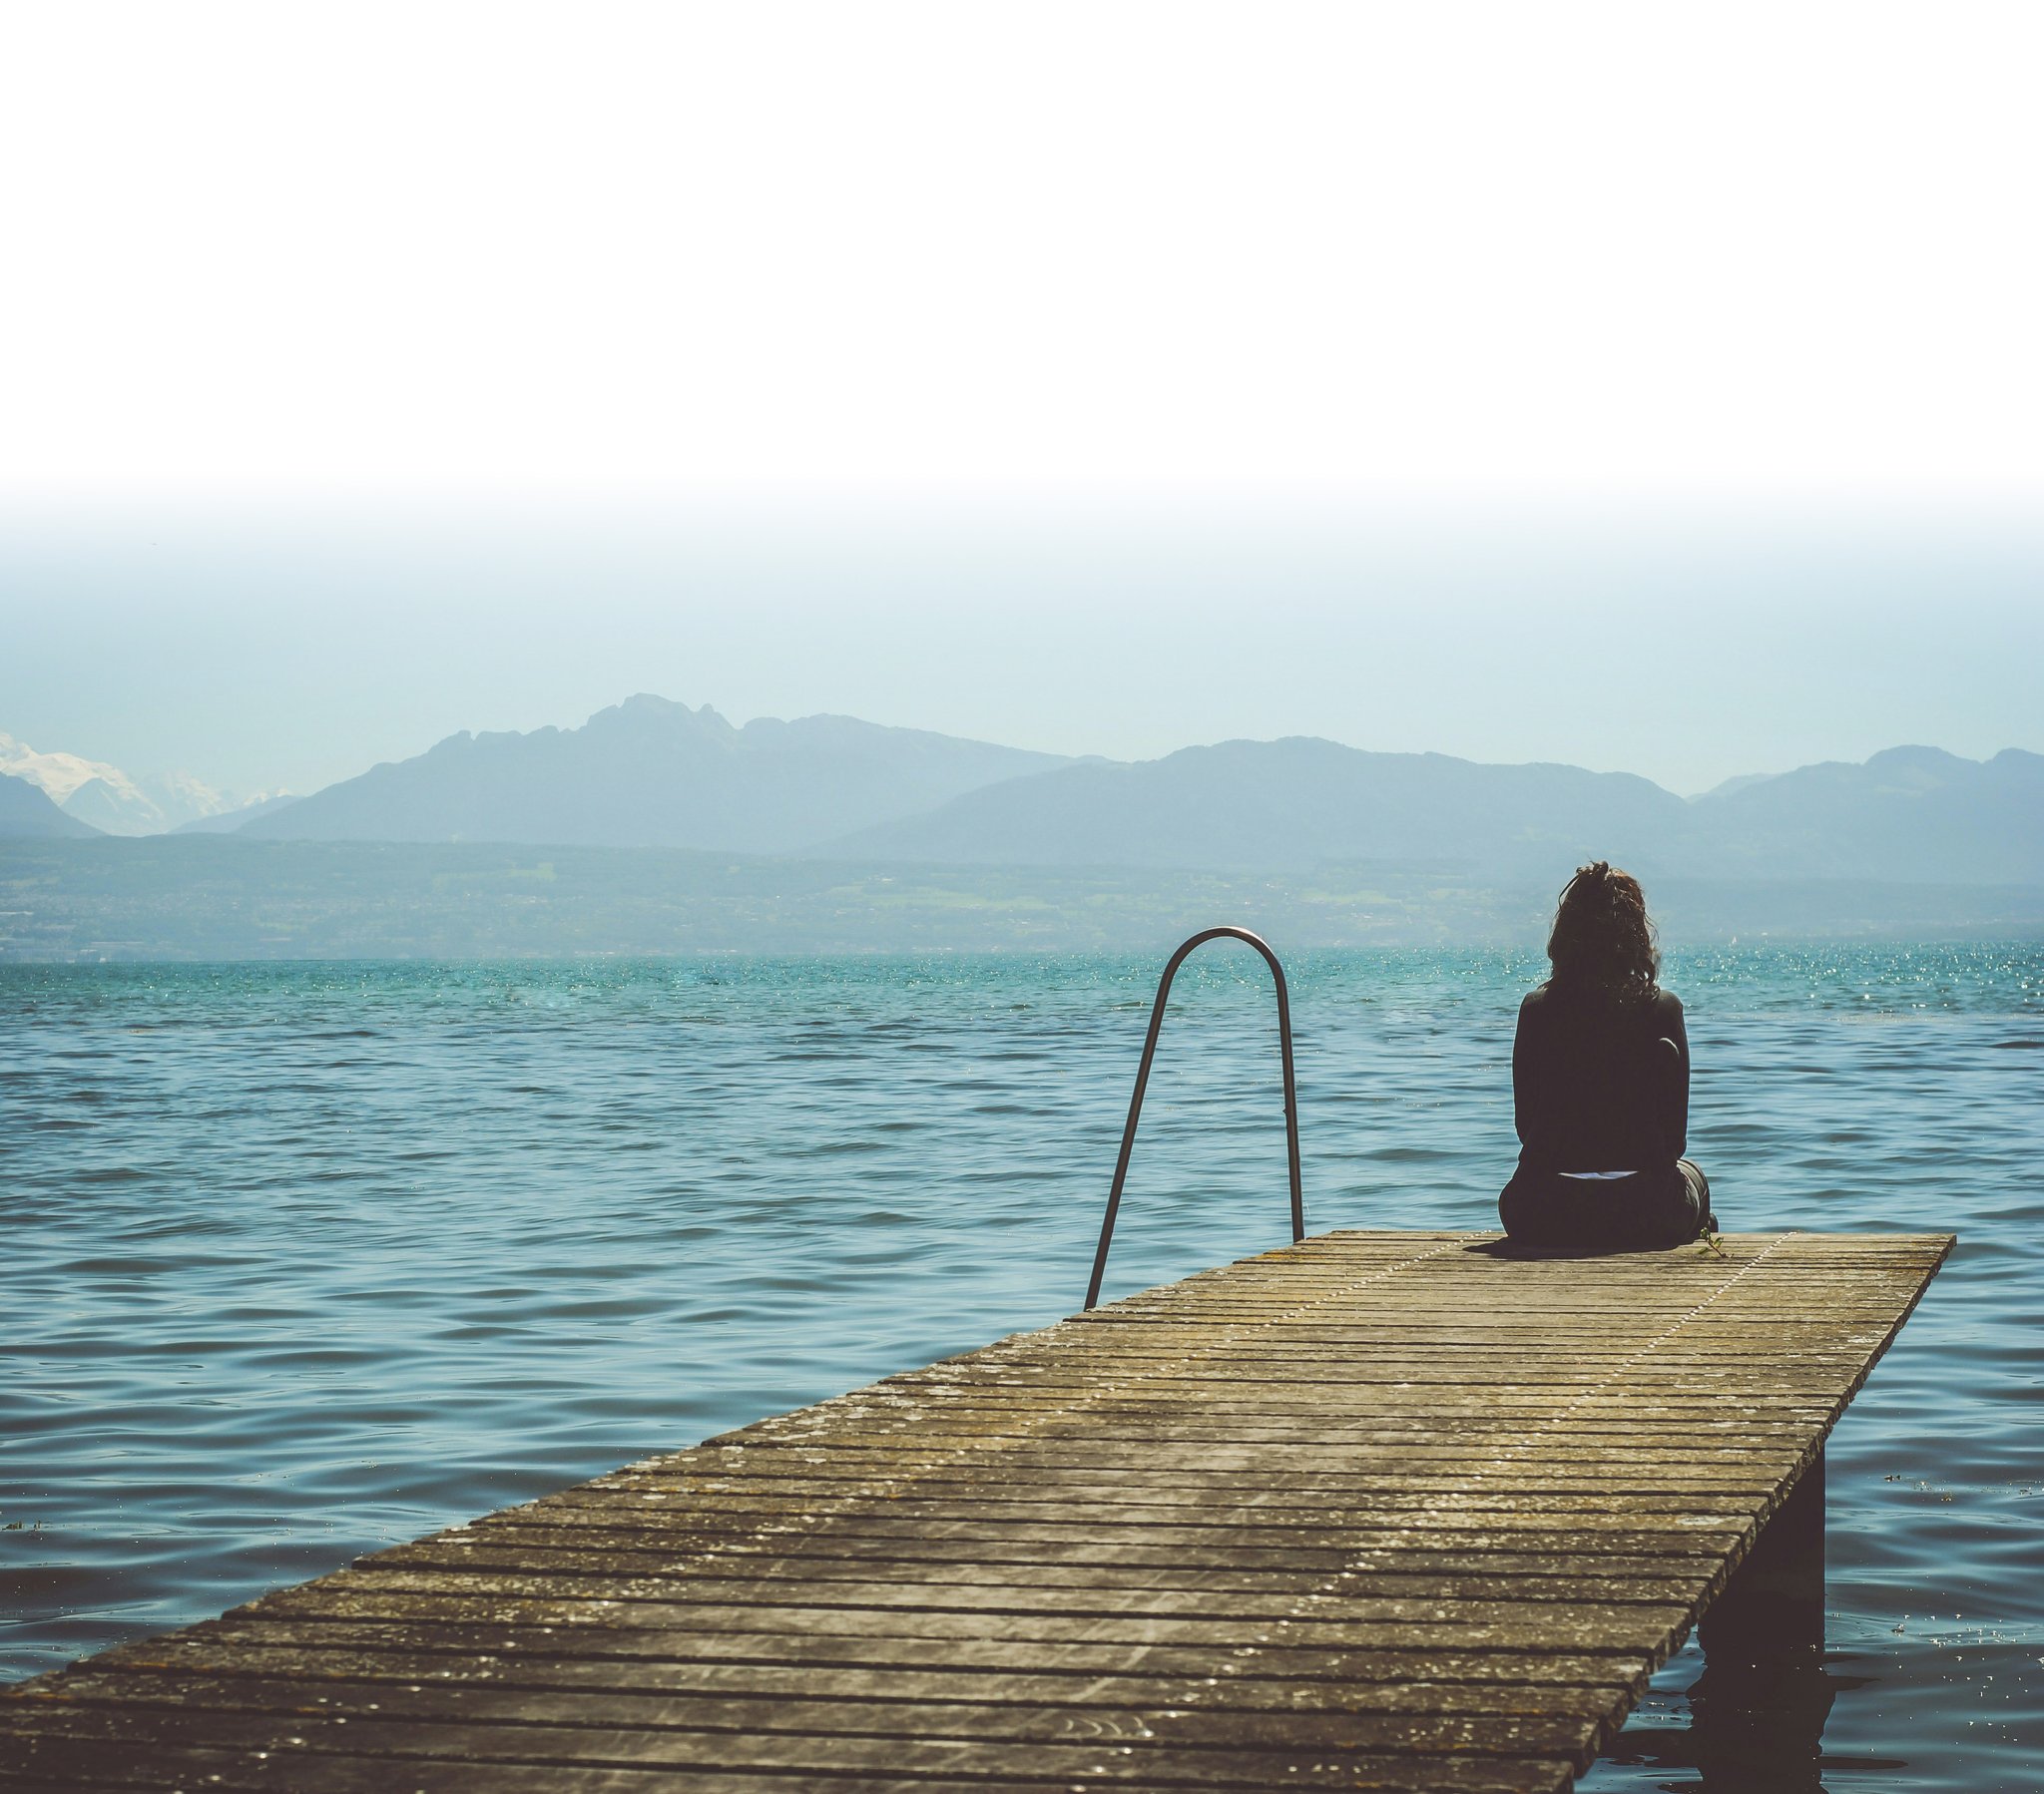 A woman sitting on a dock looking out at a body of water